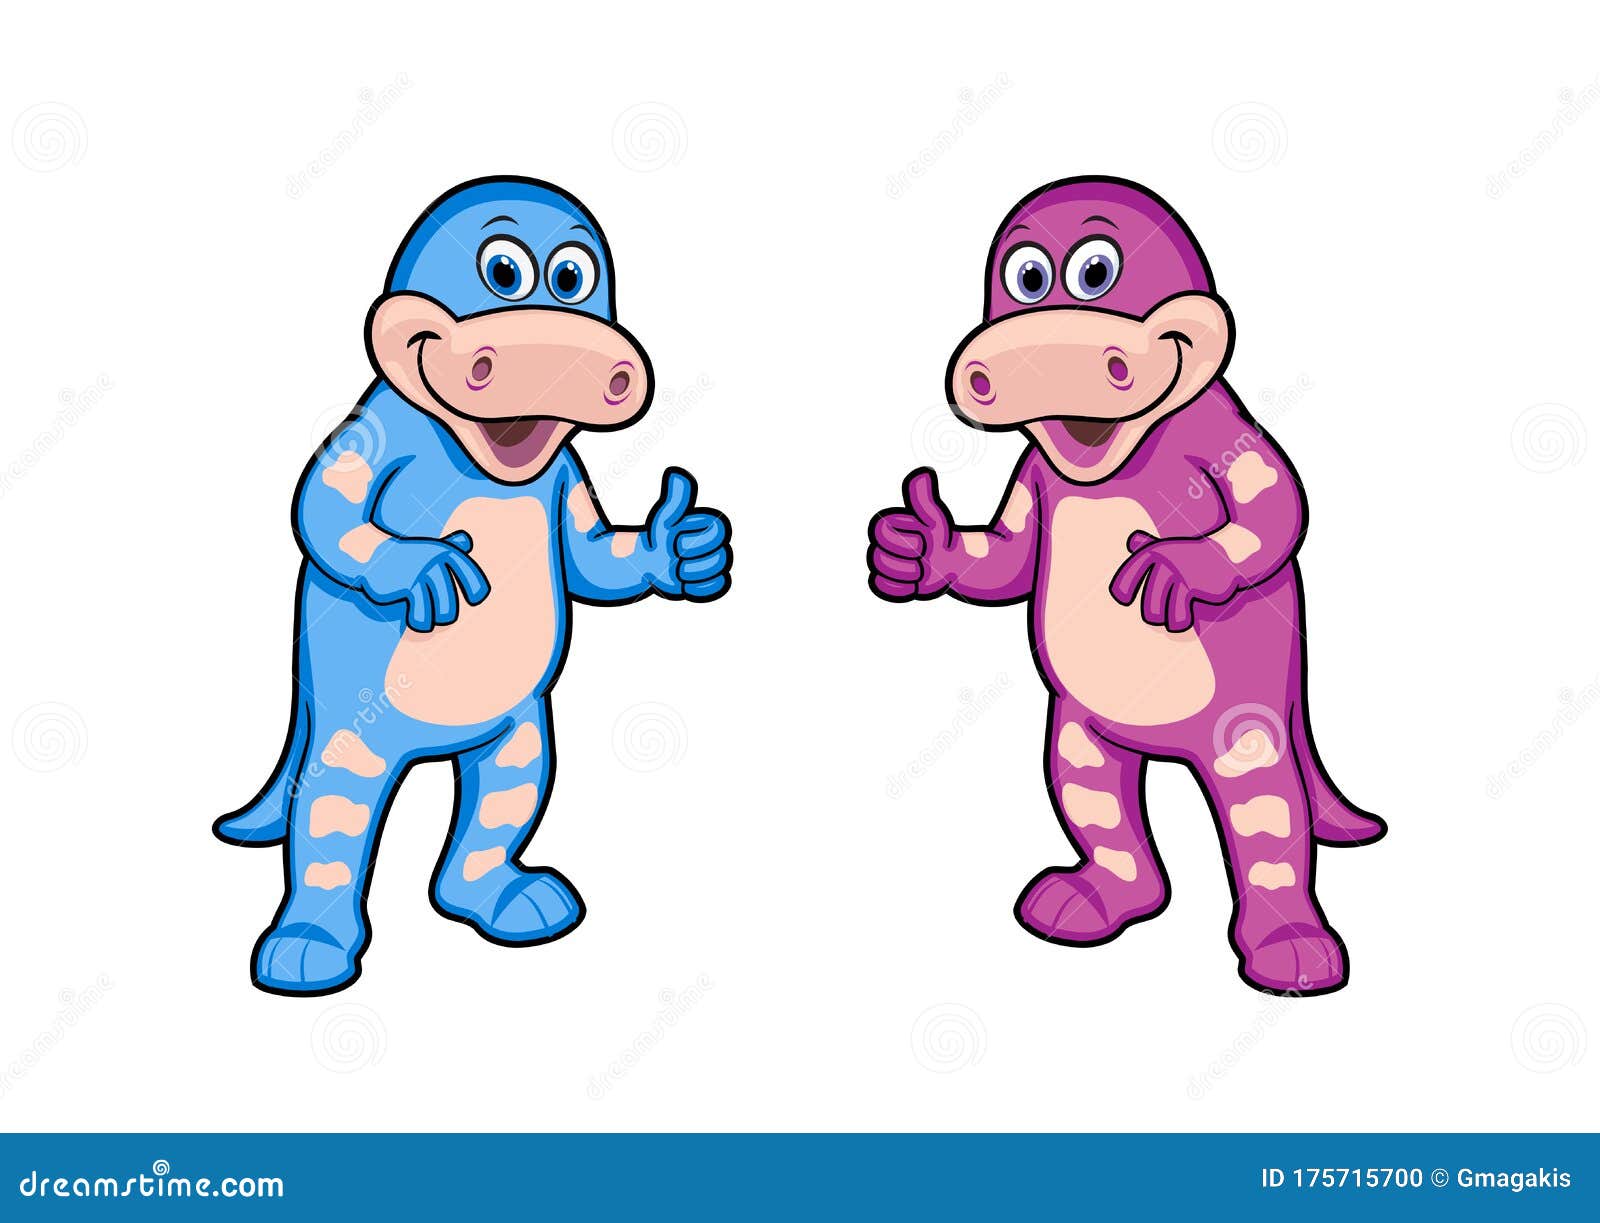 two color versions of a little dinosaur mascot